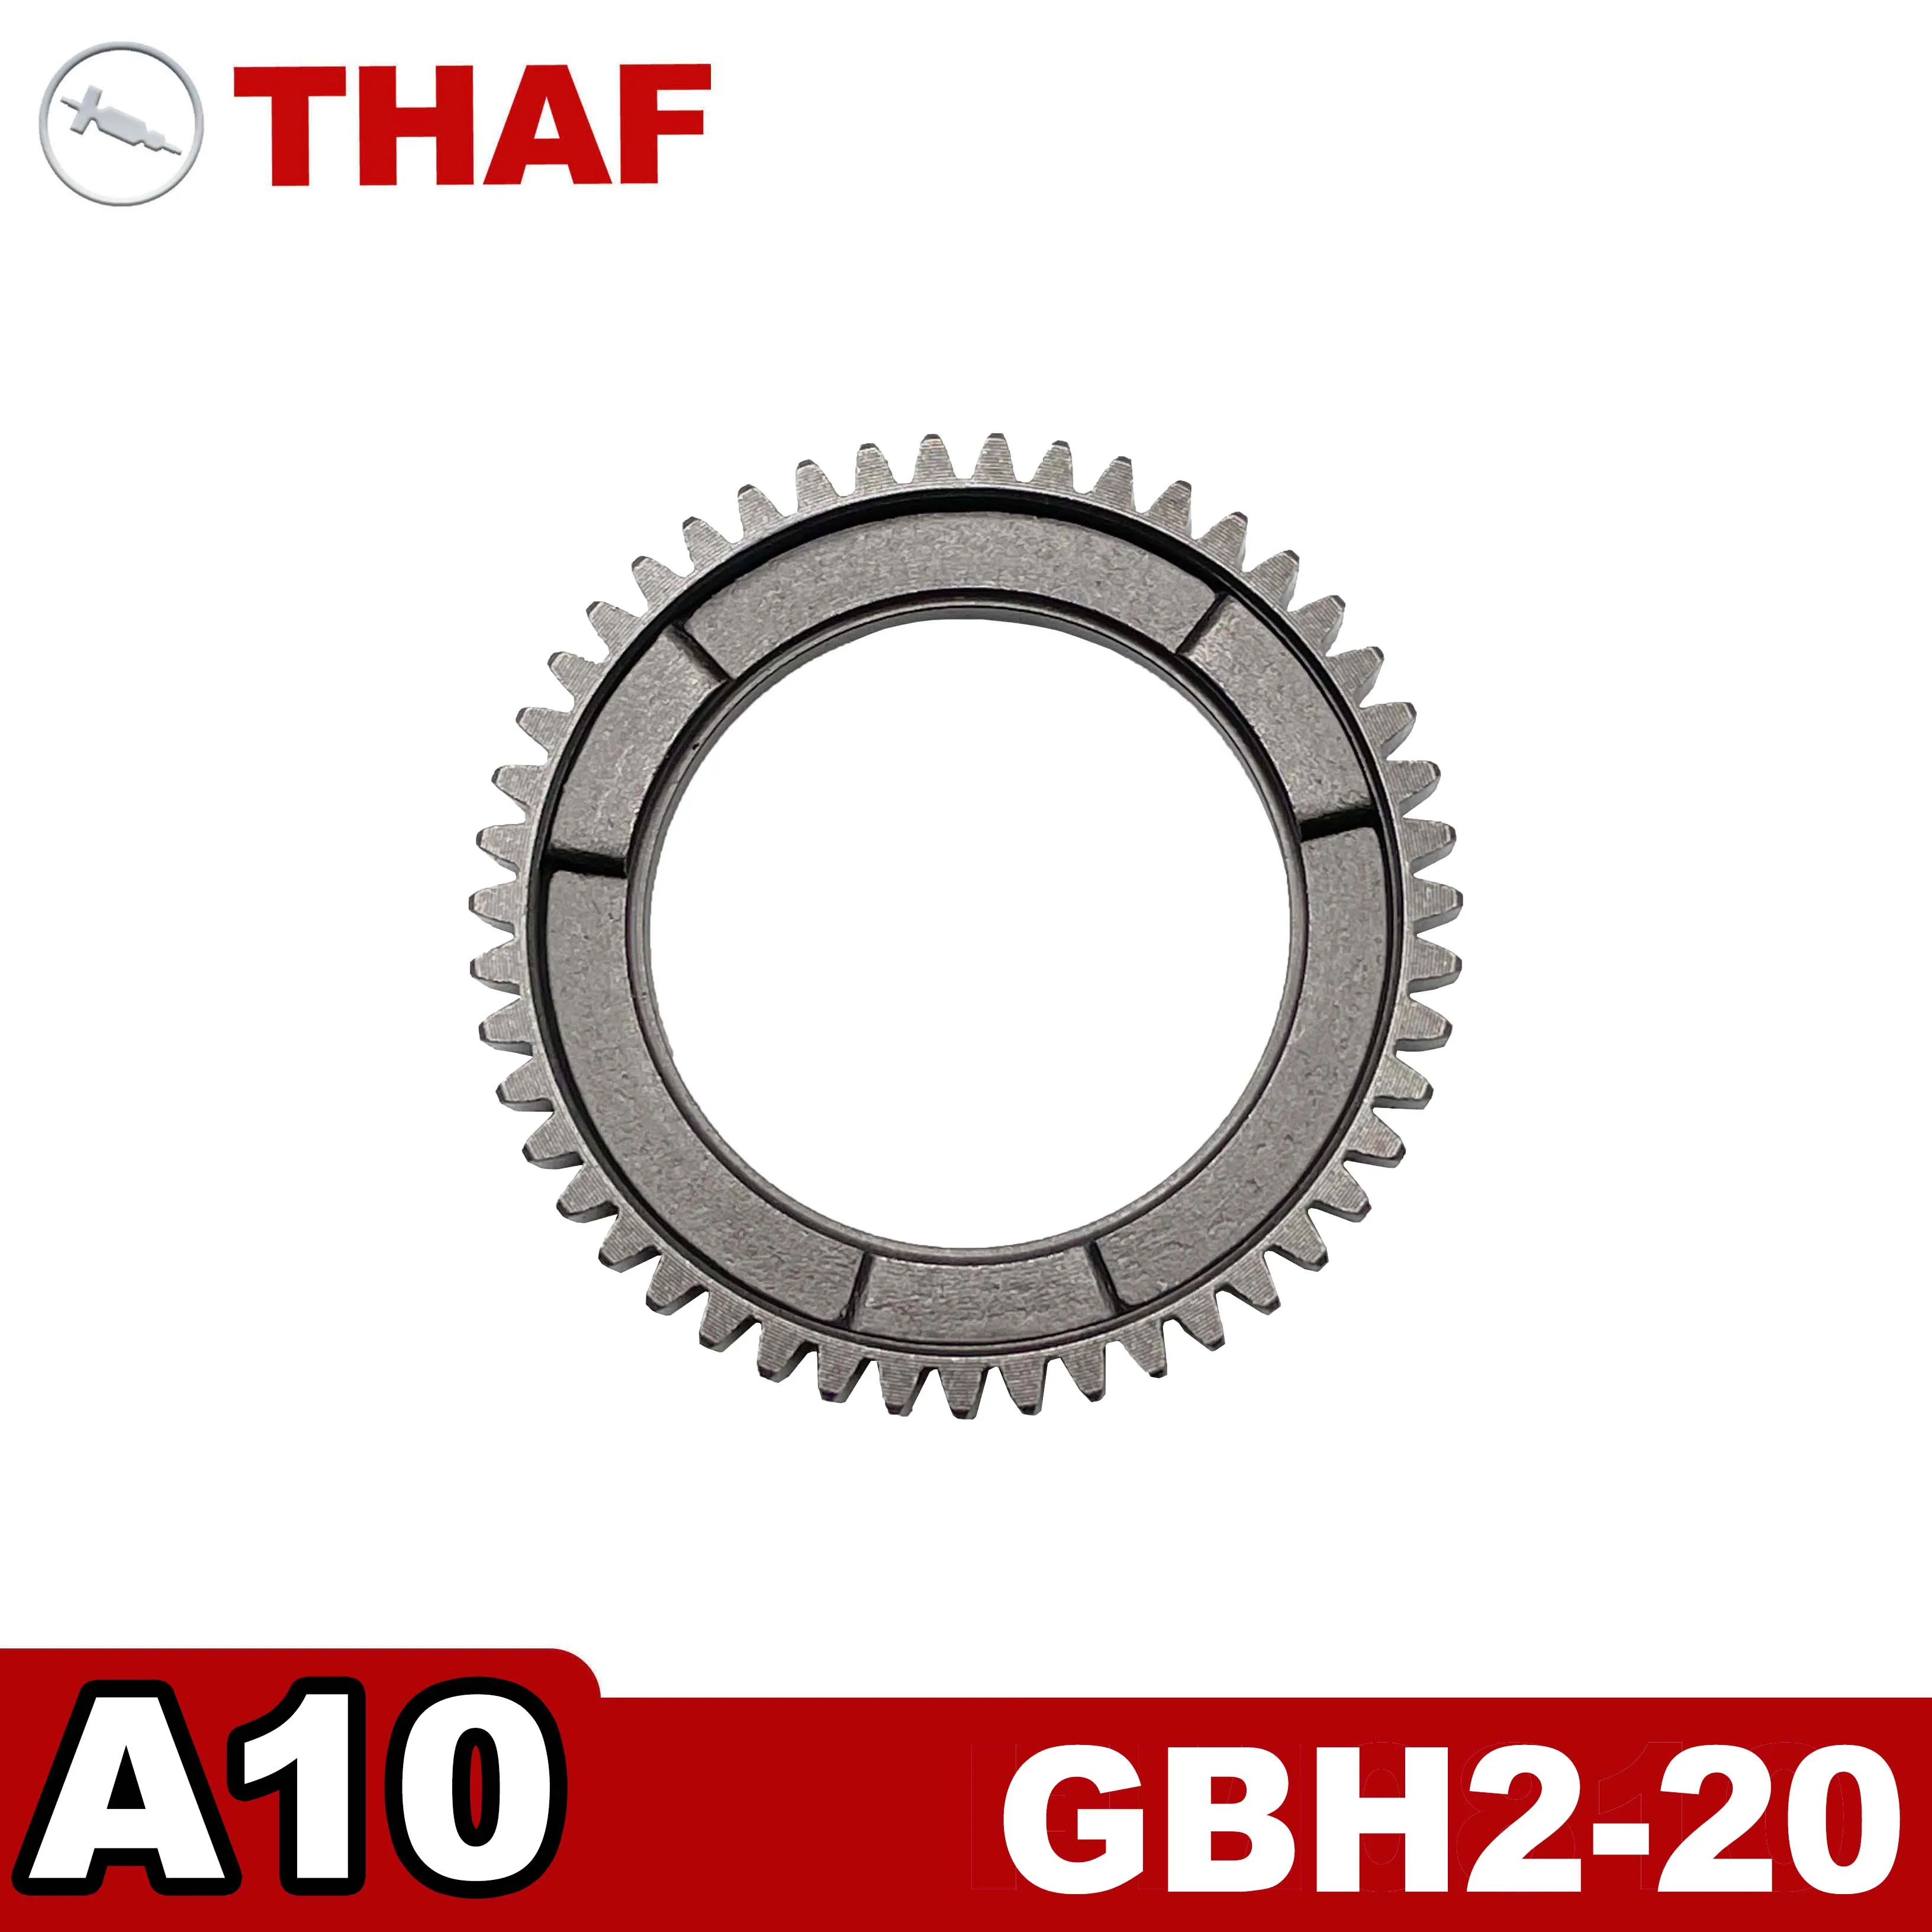 

Cylindrical Gear B Replacement Spare Parts for Bosch Rotary Hammer GBH2-20 A10